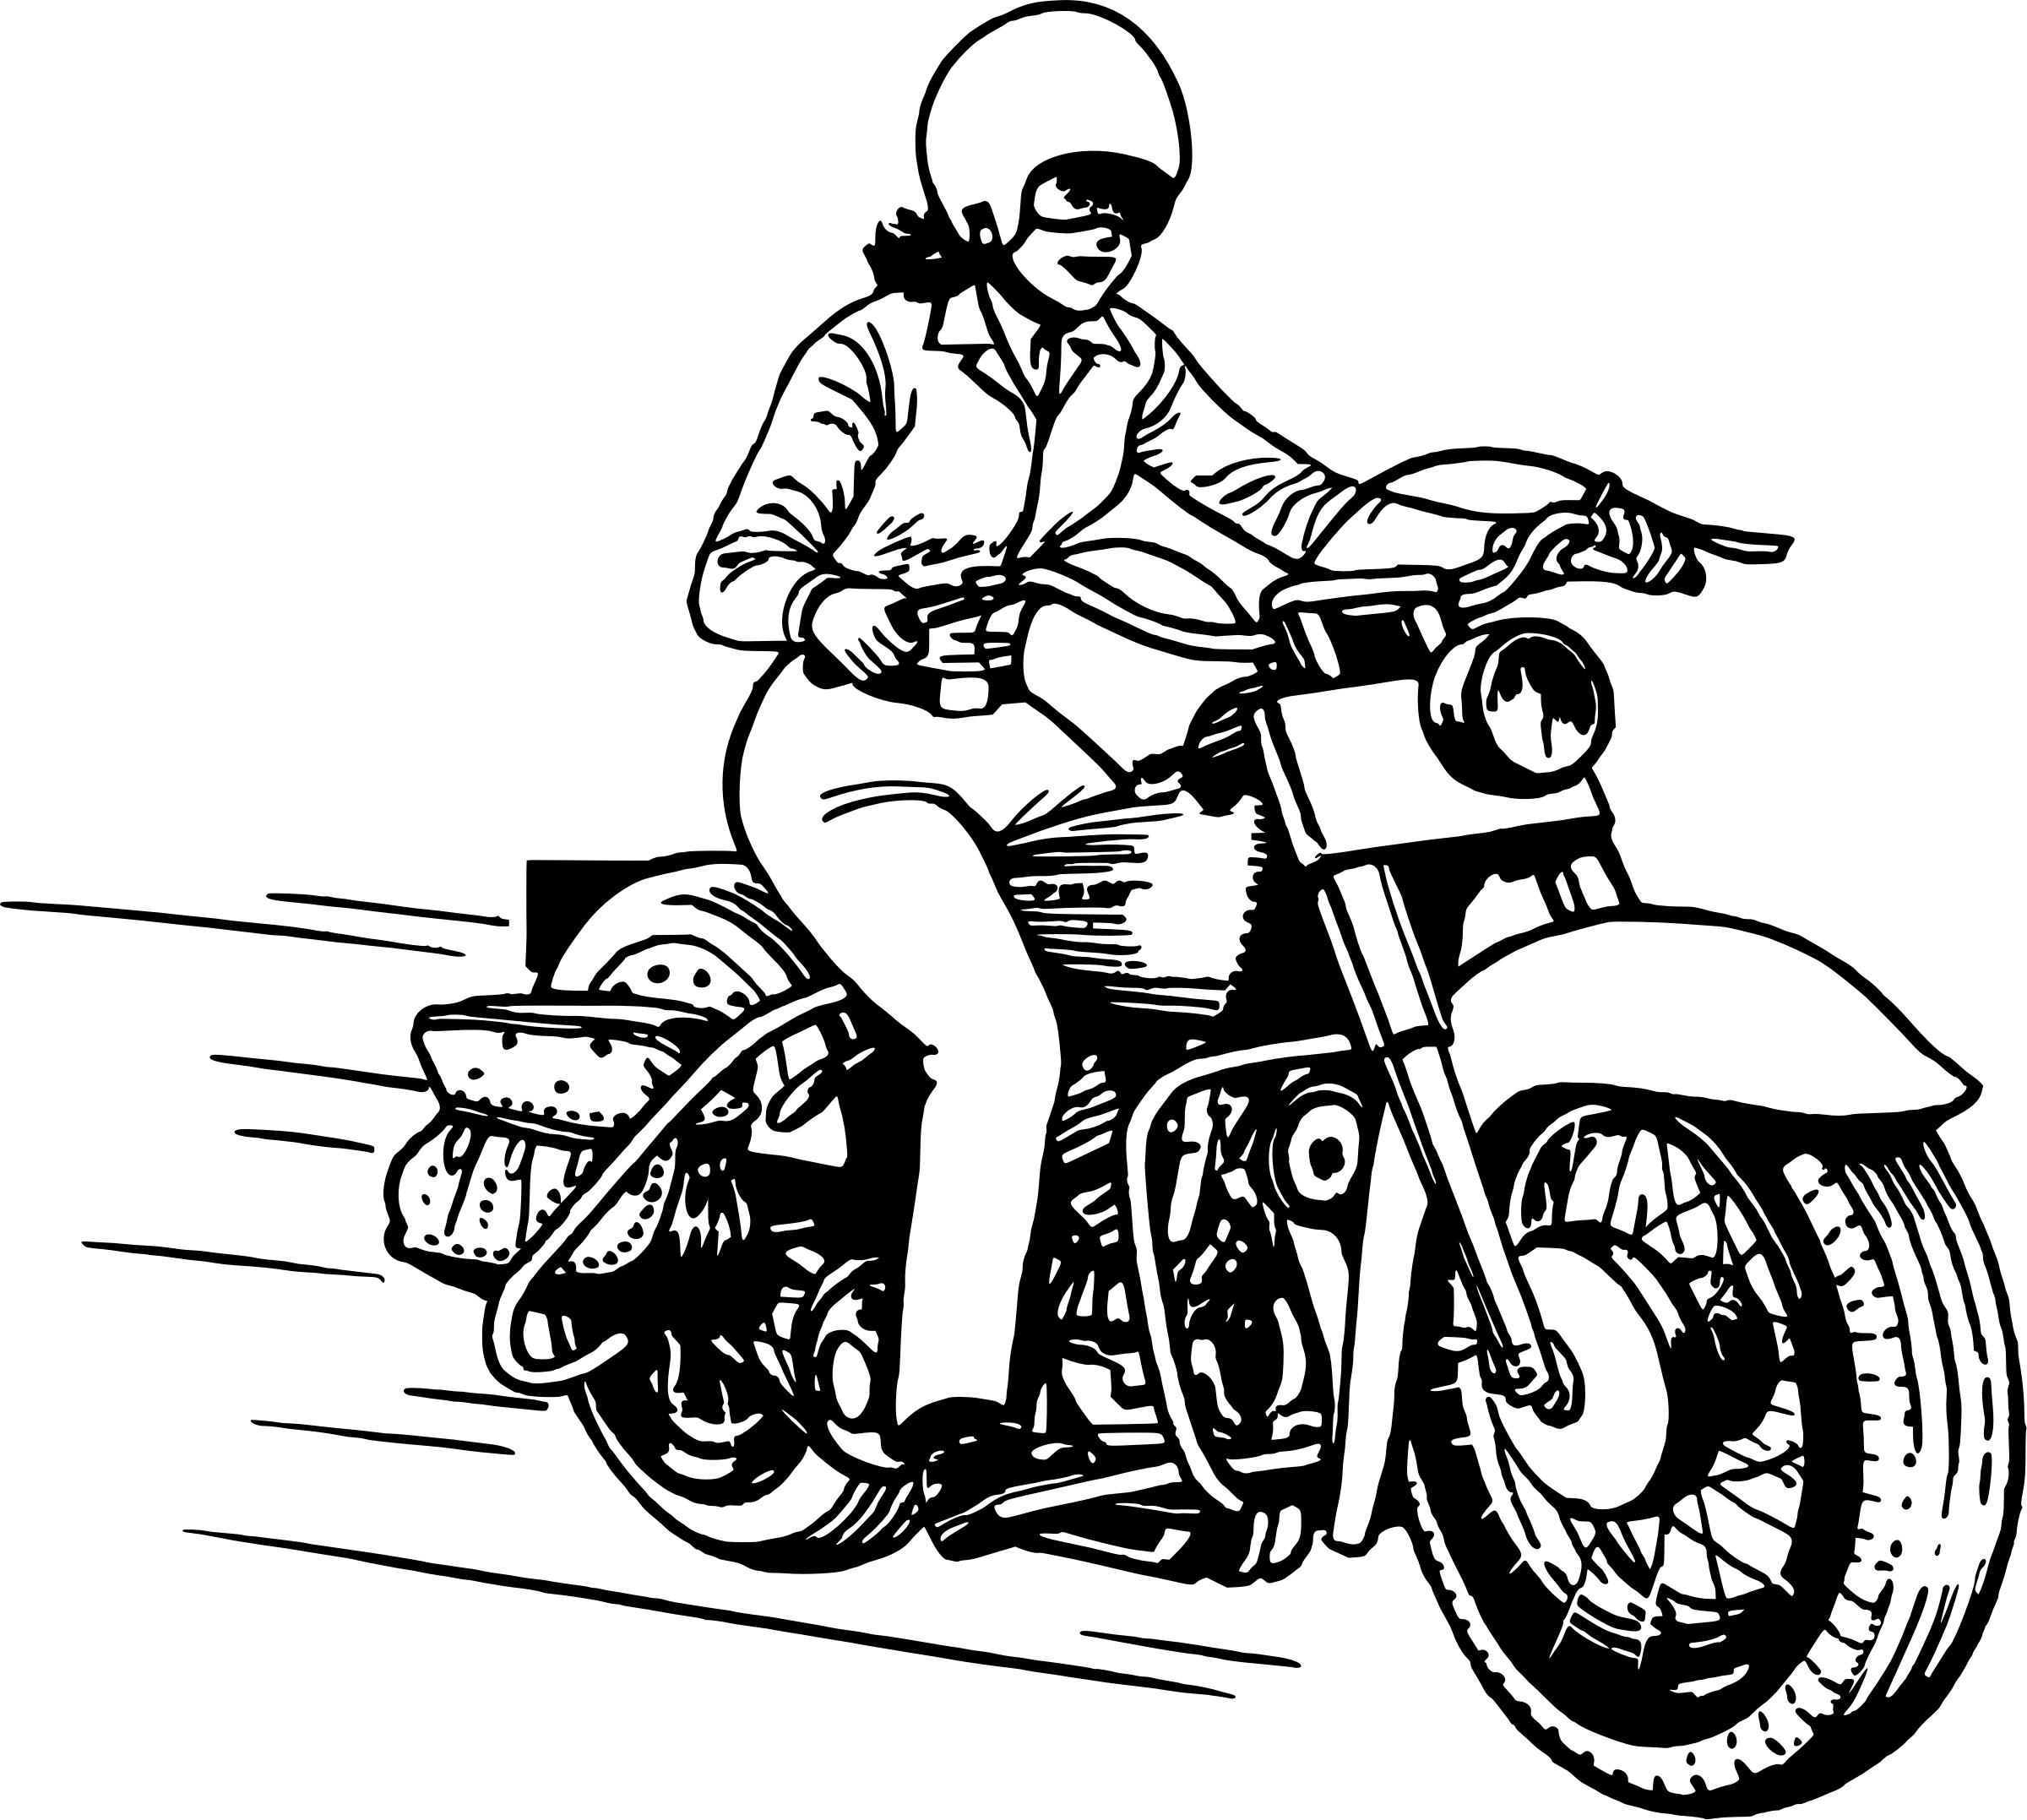 Lady on motorbike png